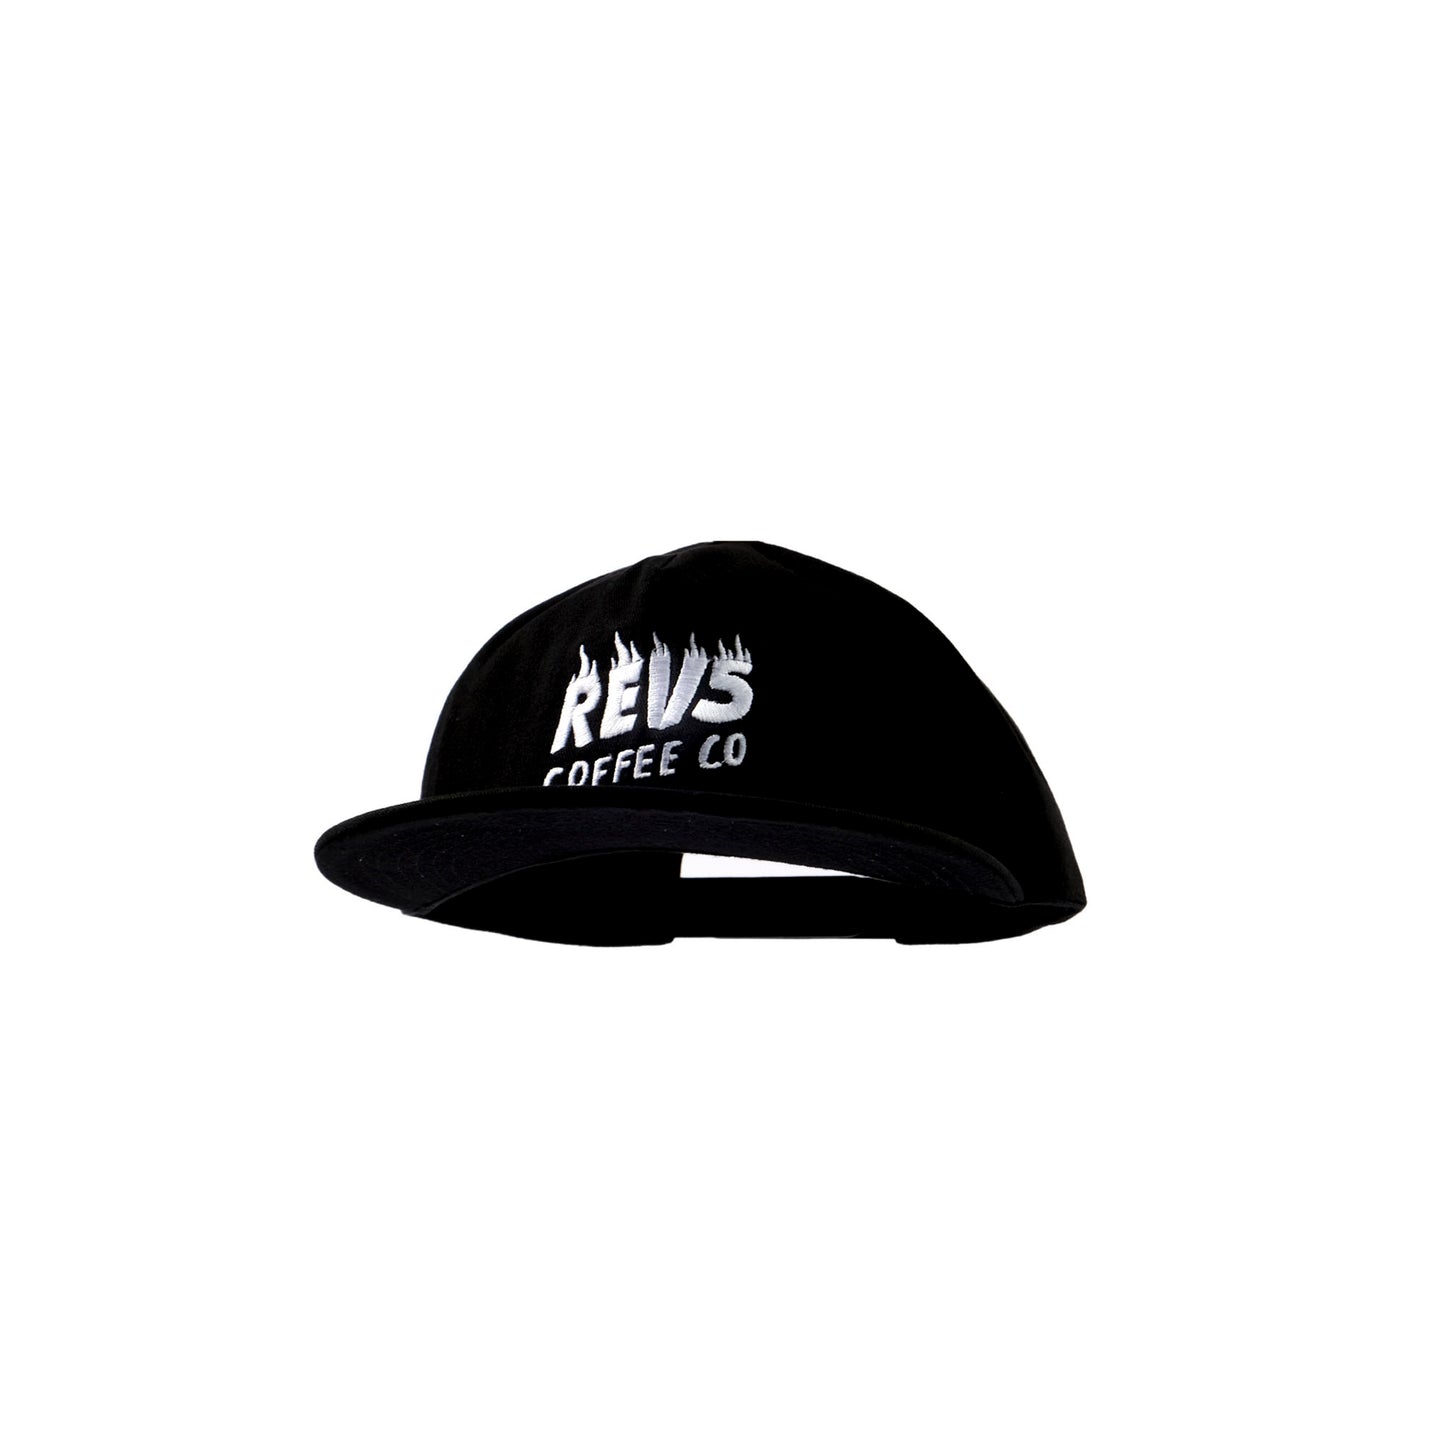 Revs Coffee Co Black Snapback Hat Cotton Twill Embroidered Flat Brim Structured 5 Panel